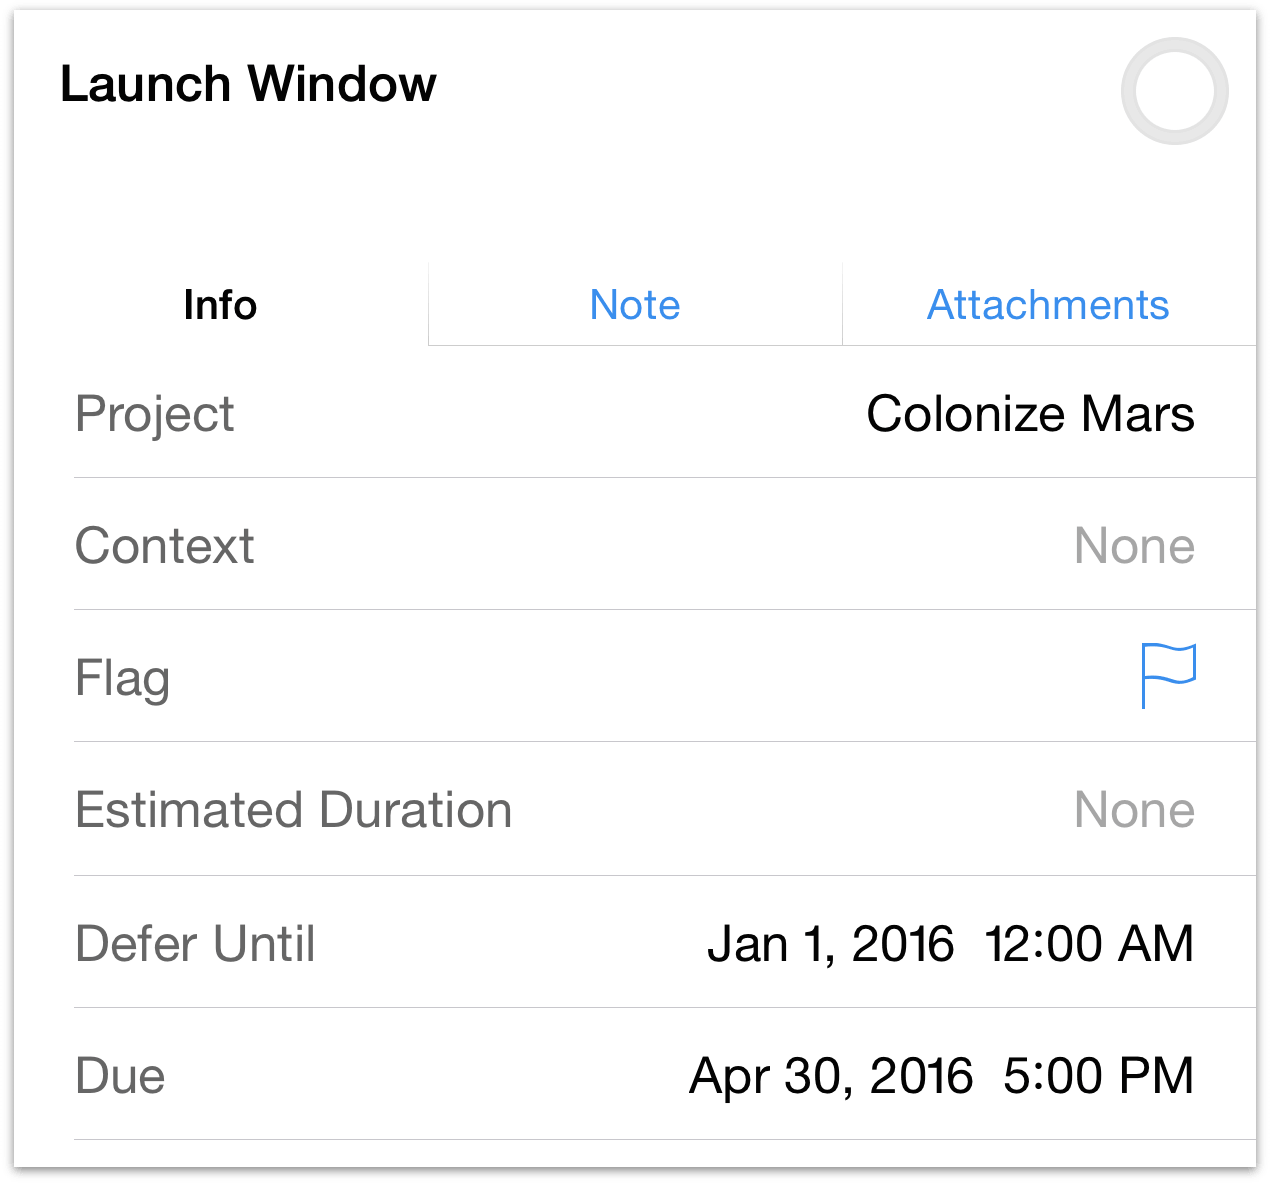 Creating a Launch Window action in the Colonize Mars project, bracketed by a defer until date and a due date.